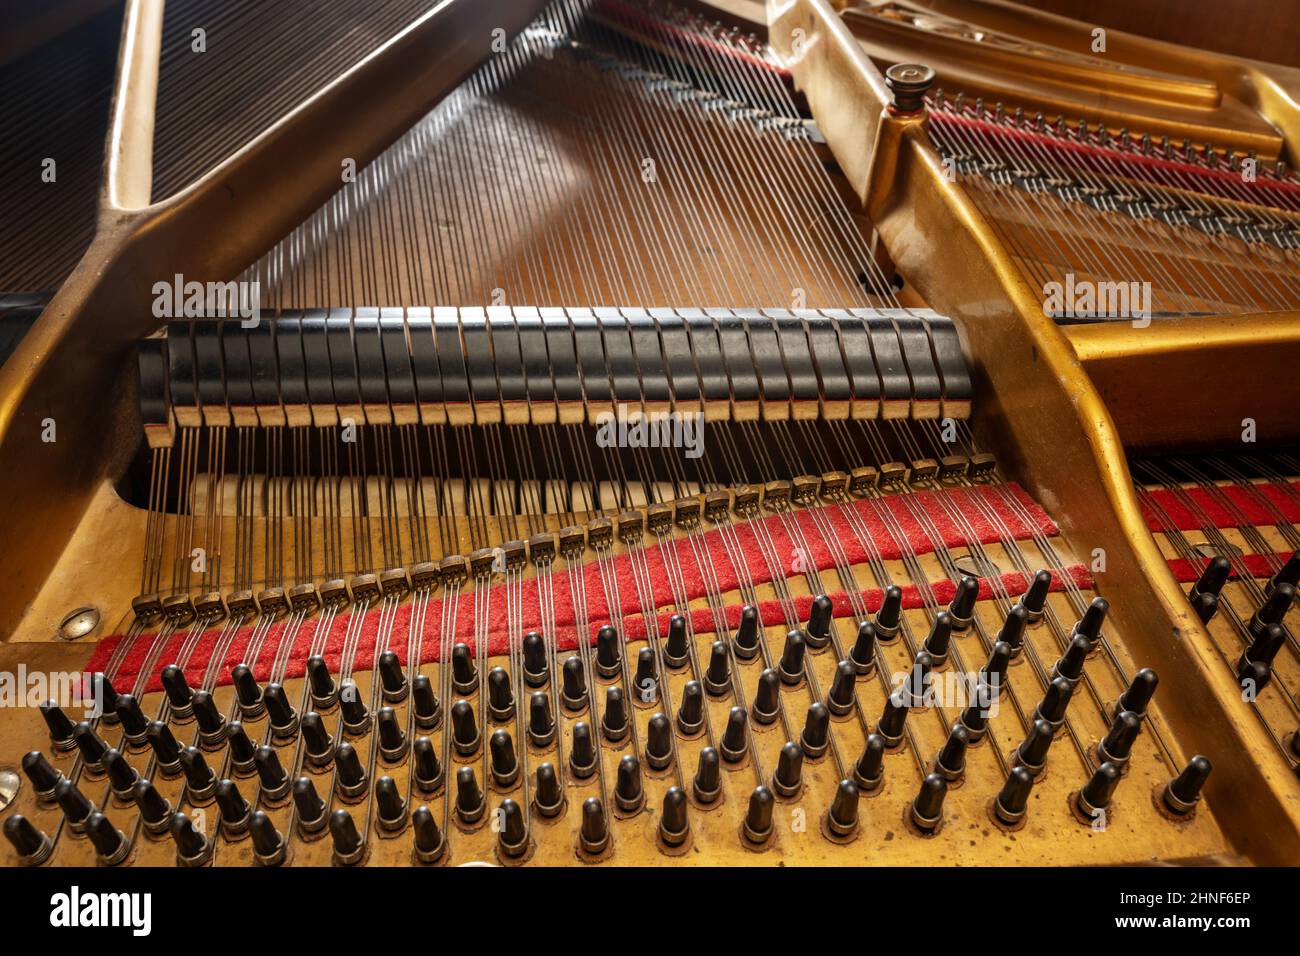 Inside an older grand piano with metal frame, strings, hammer, damper and red felt, mechanics of the acoustic musical instrument, music and culture co Stock Photo